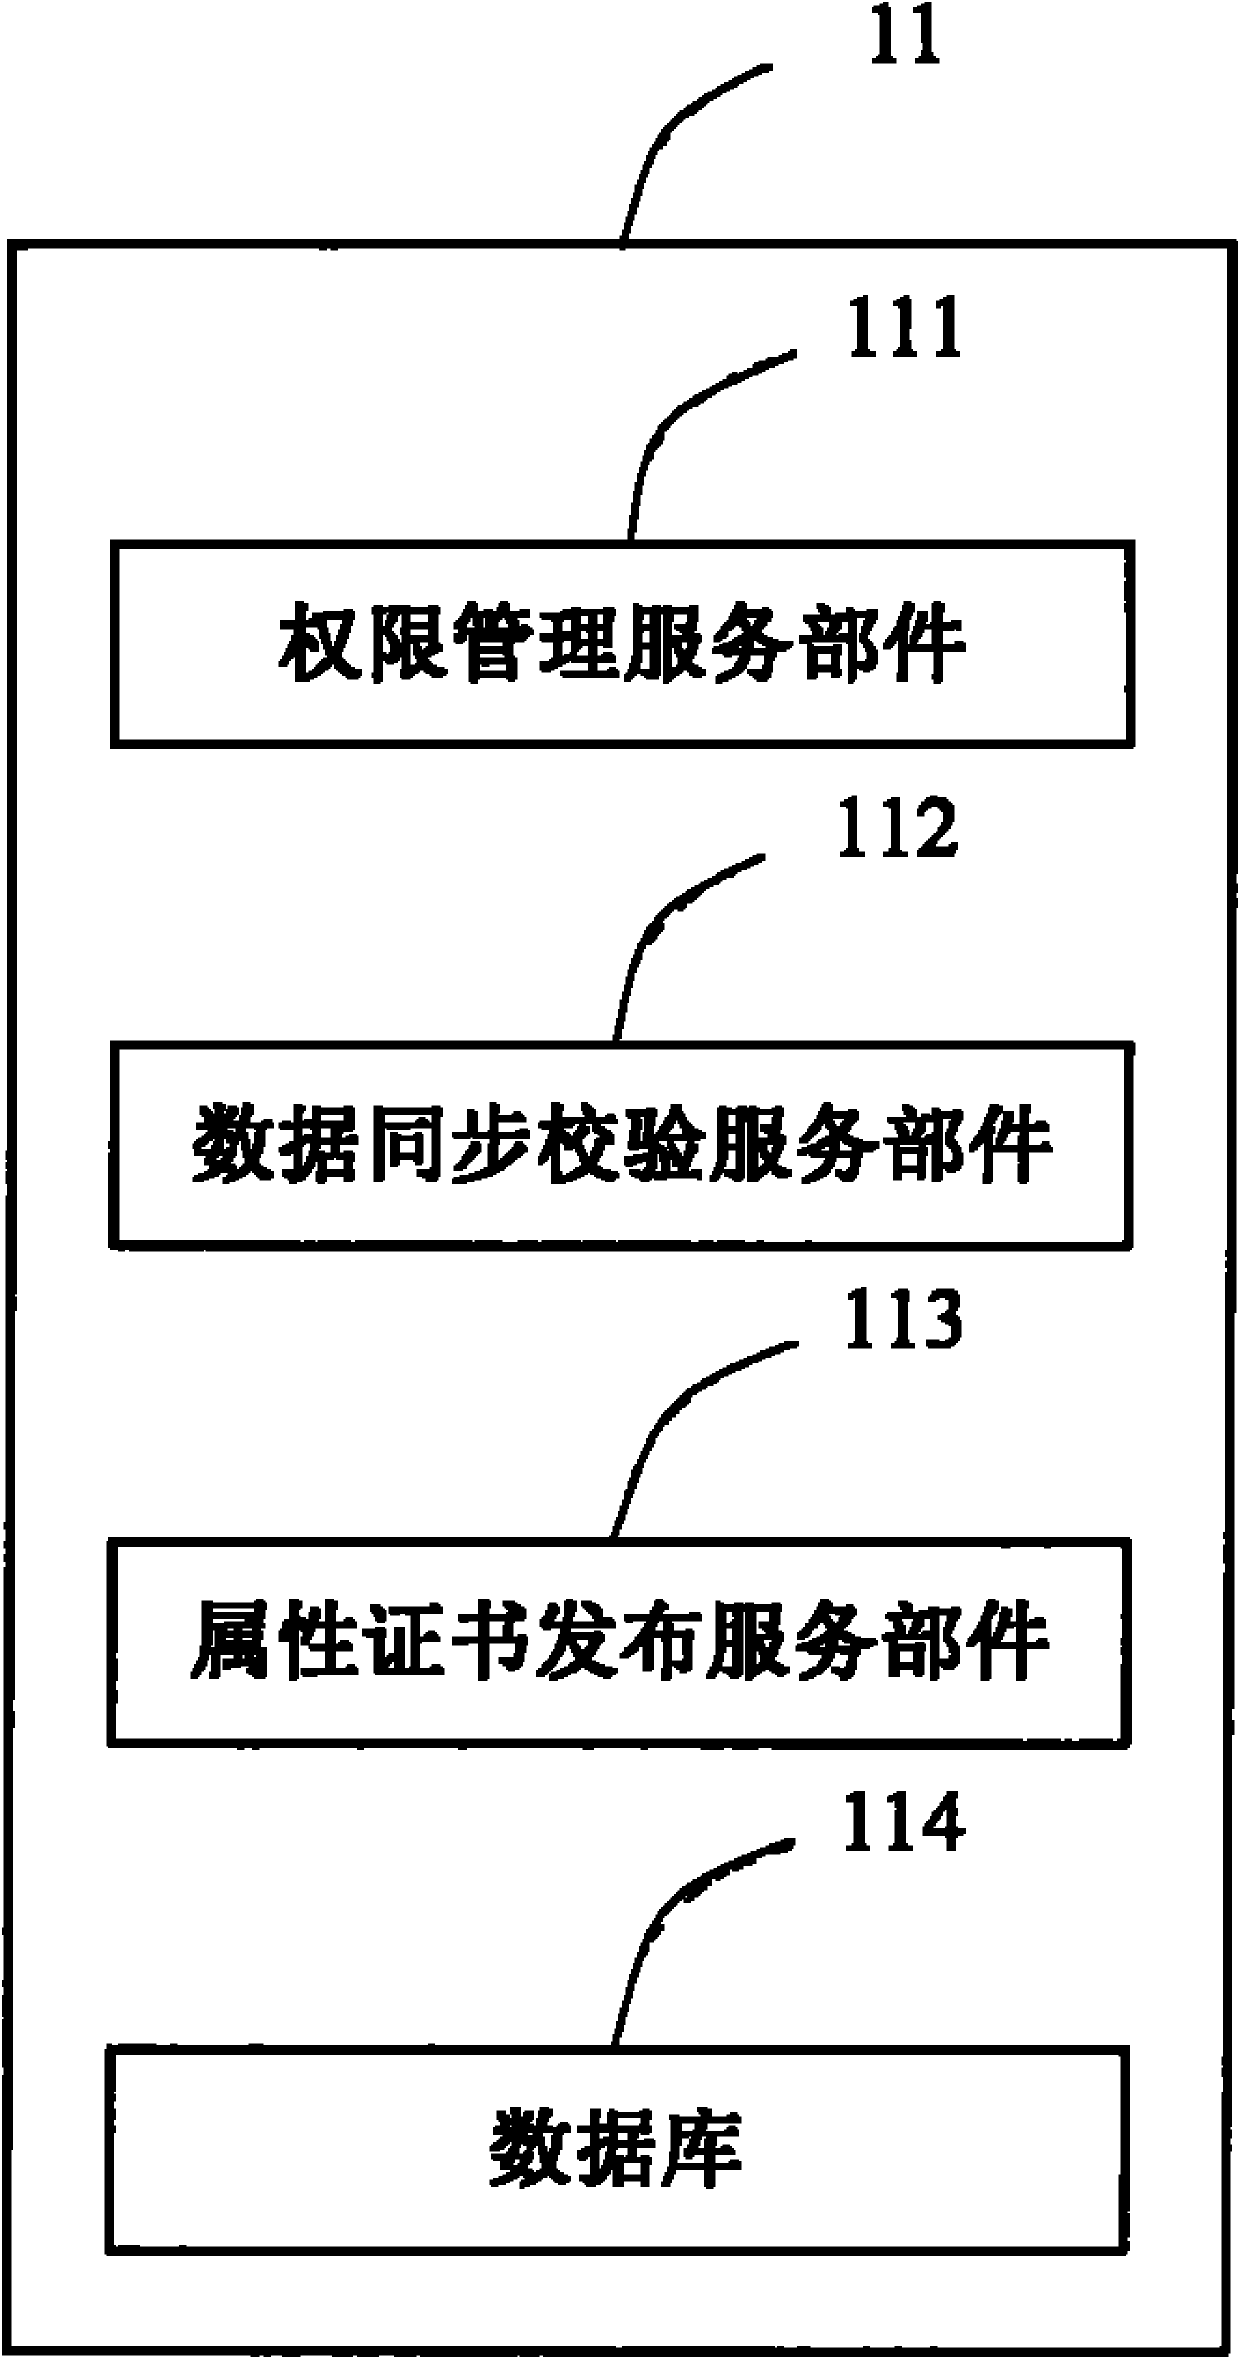 Distributed authorization management system and implementation method thereof